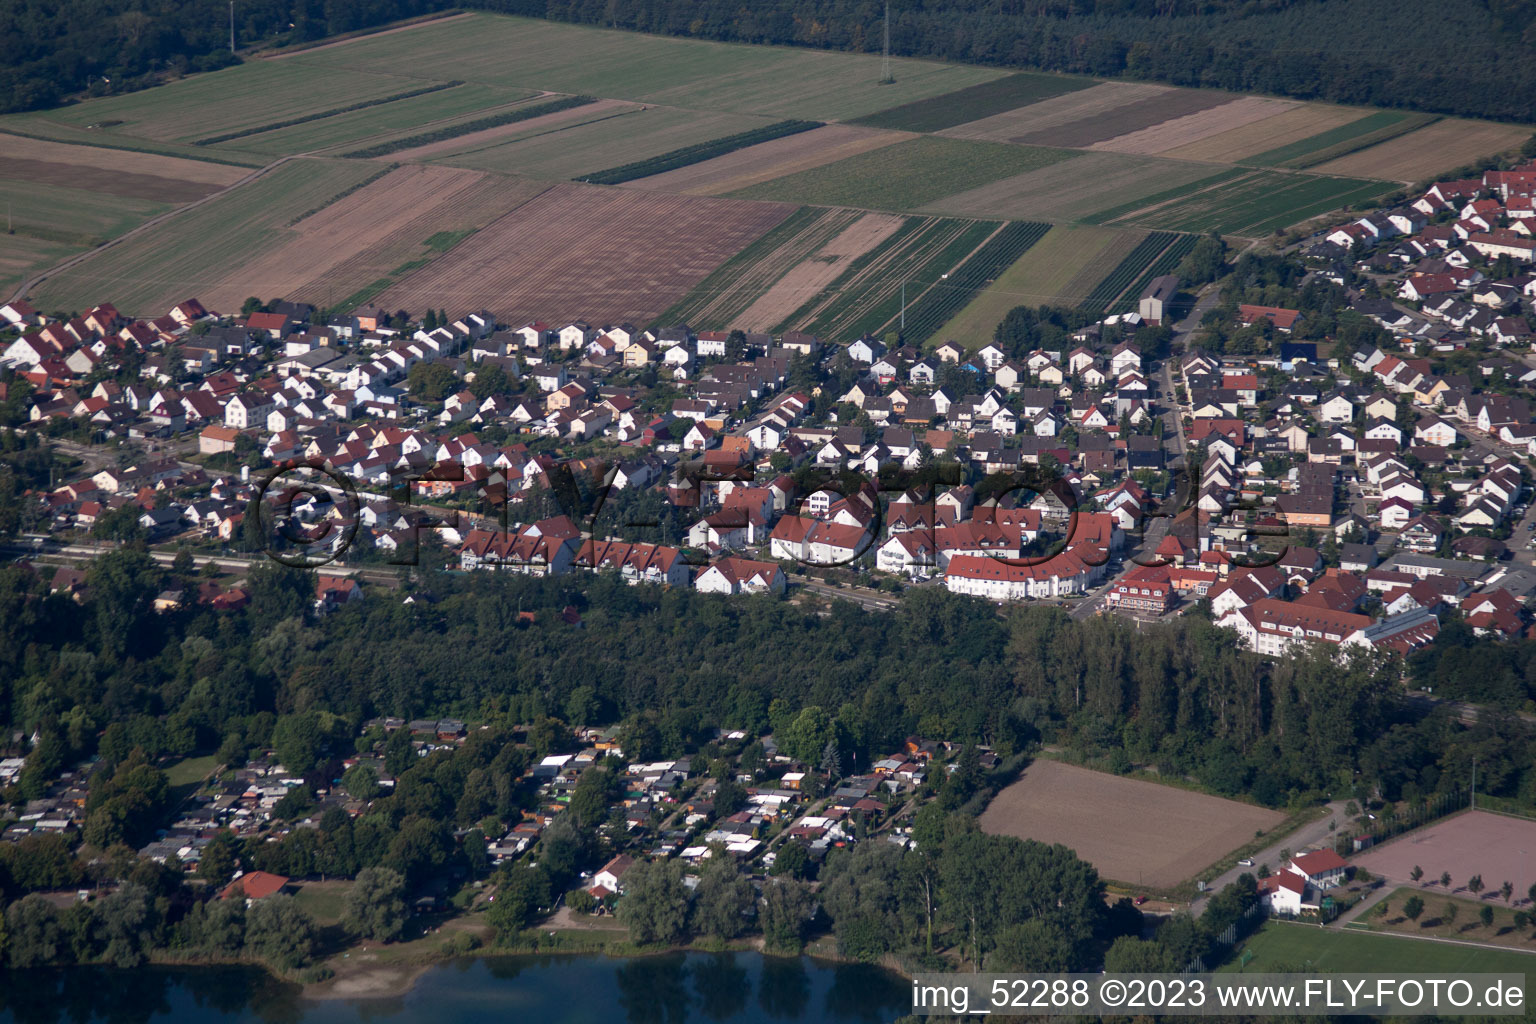 Aerial photograpy of Germersheim in the state Rhineland-Palatinate, Germany